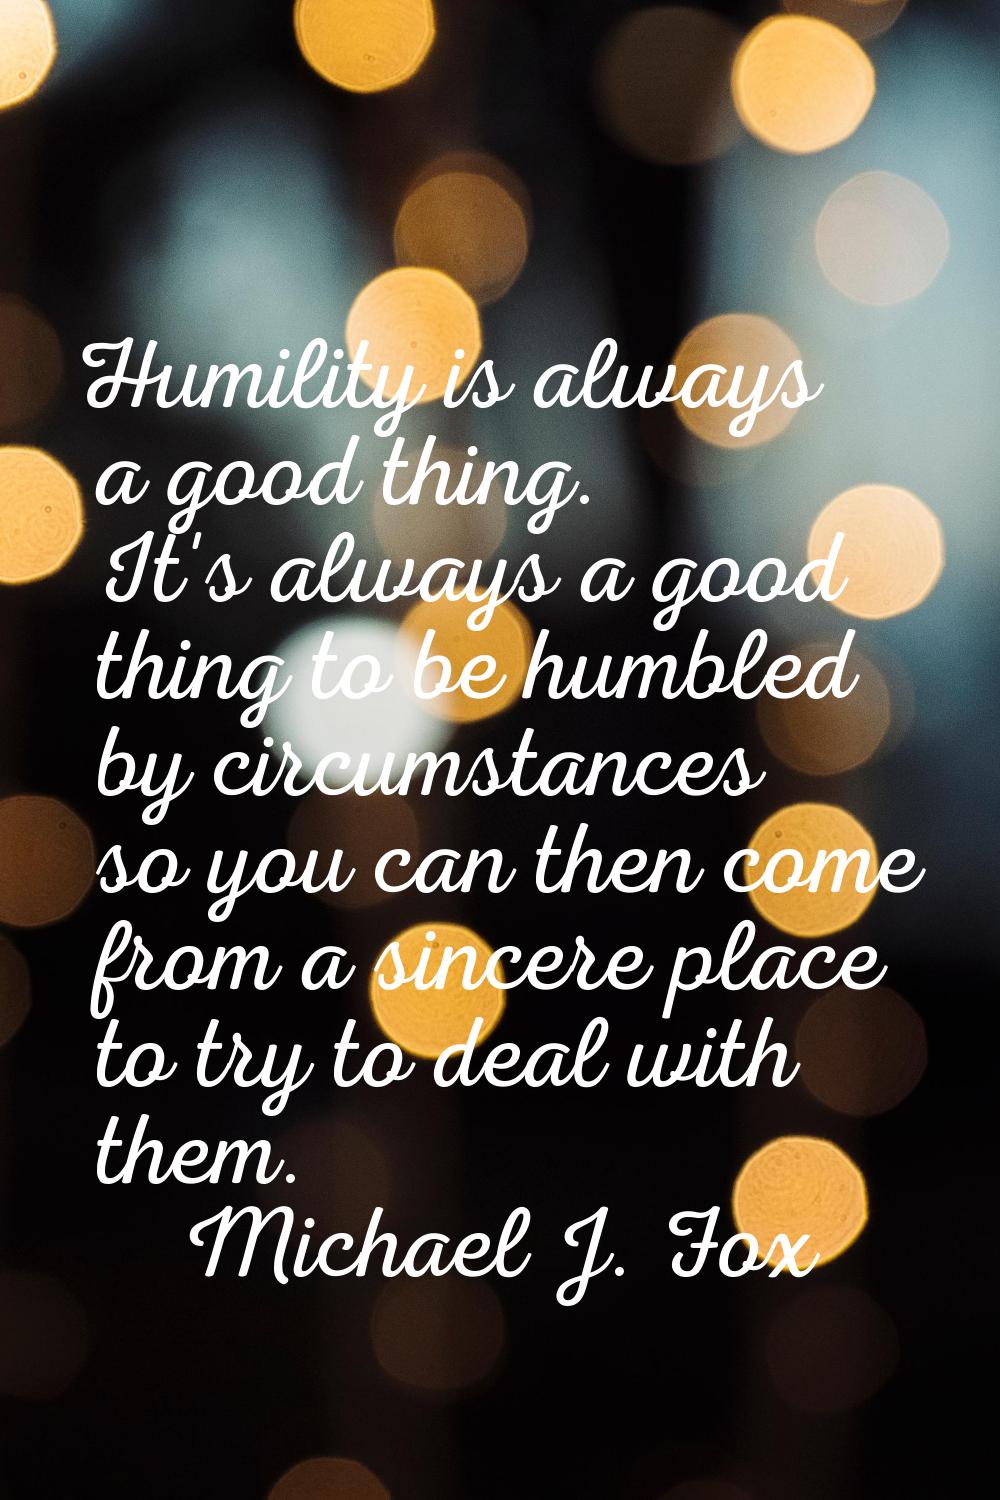 Humility is always a good thing. It's always a good thing to be humbled by circumstances so you can